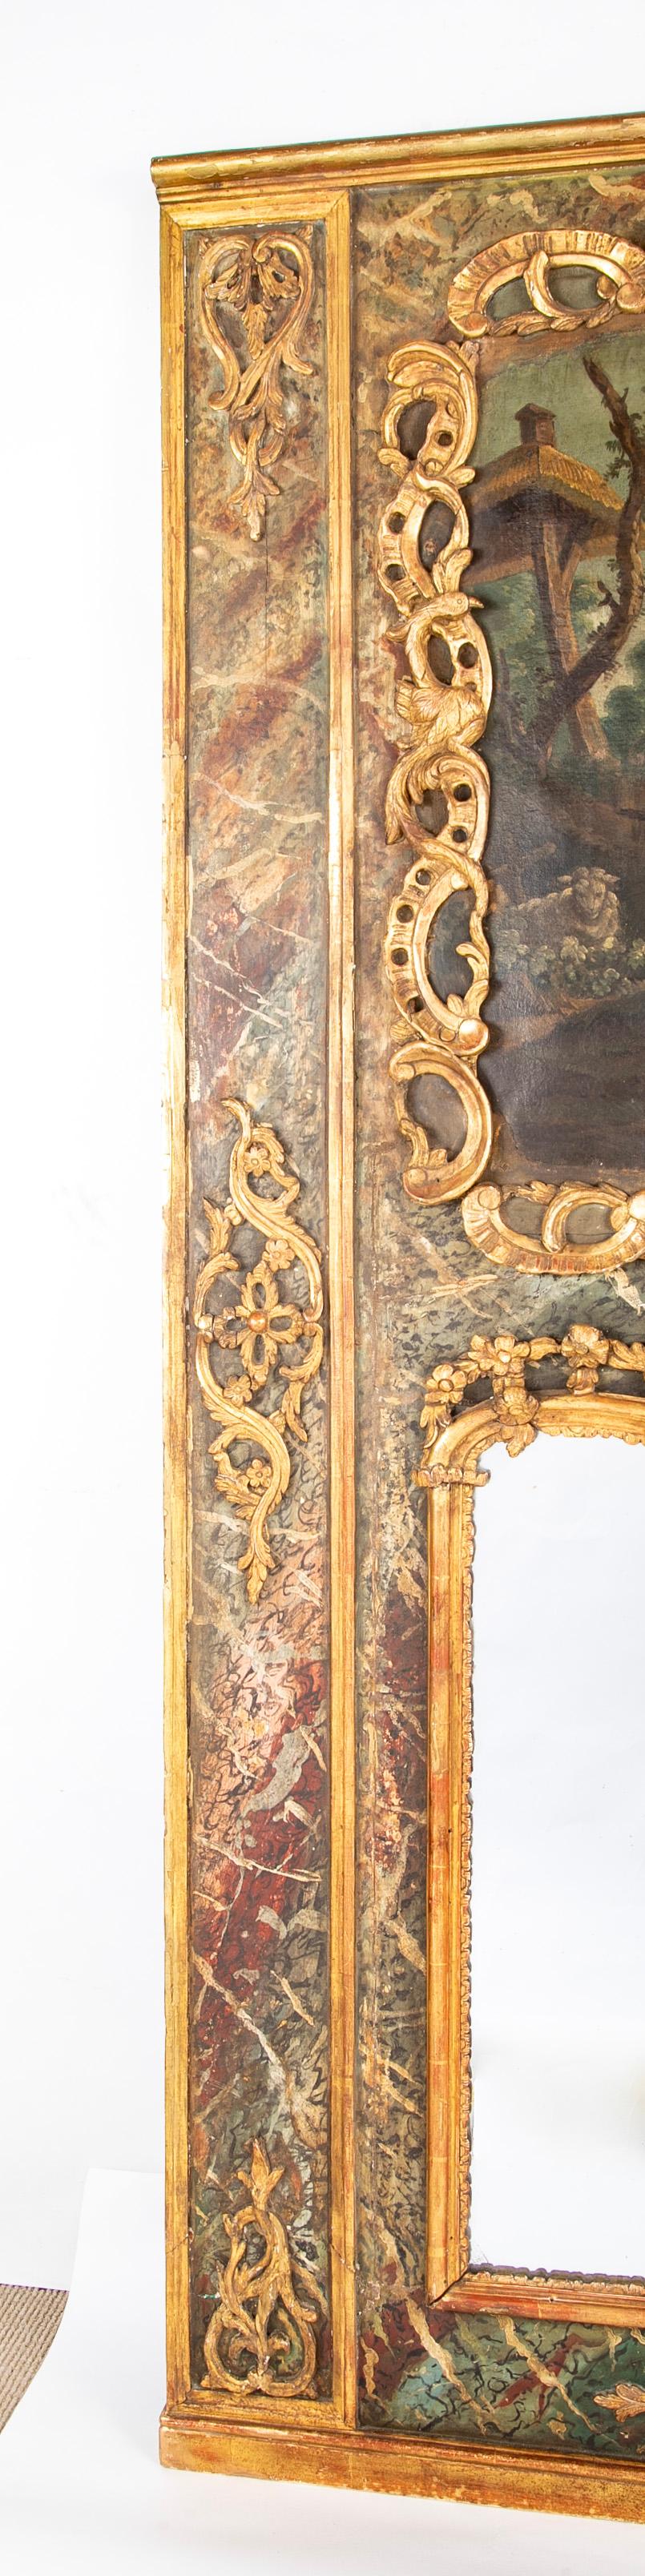 Glass Late 18th Century French Trumeau Mirror with Romantic Painting For Sale